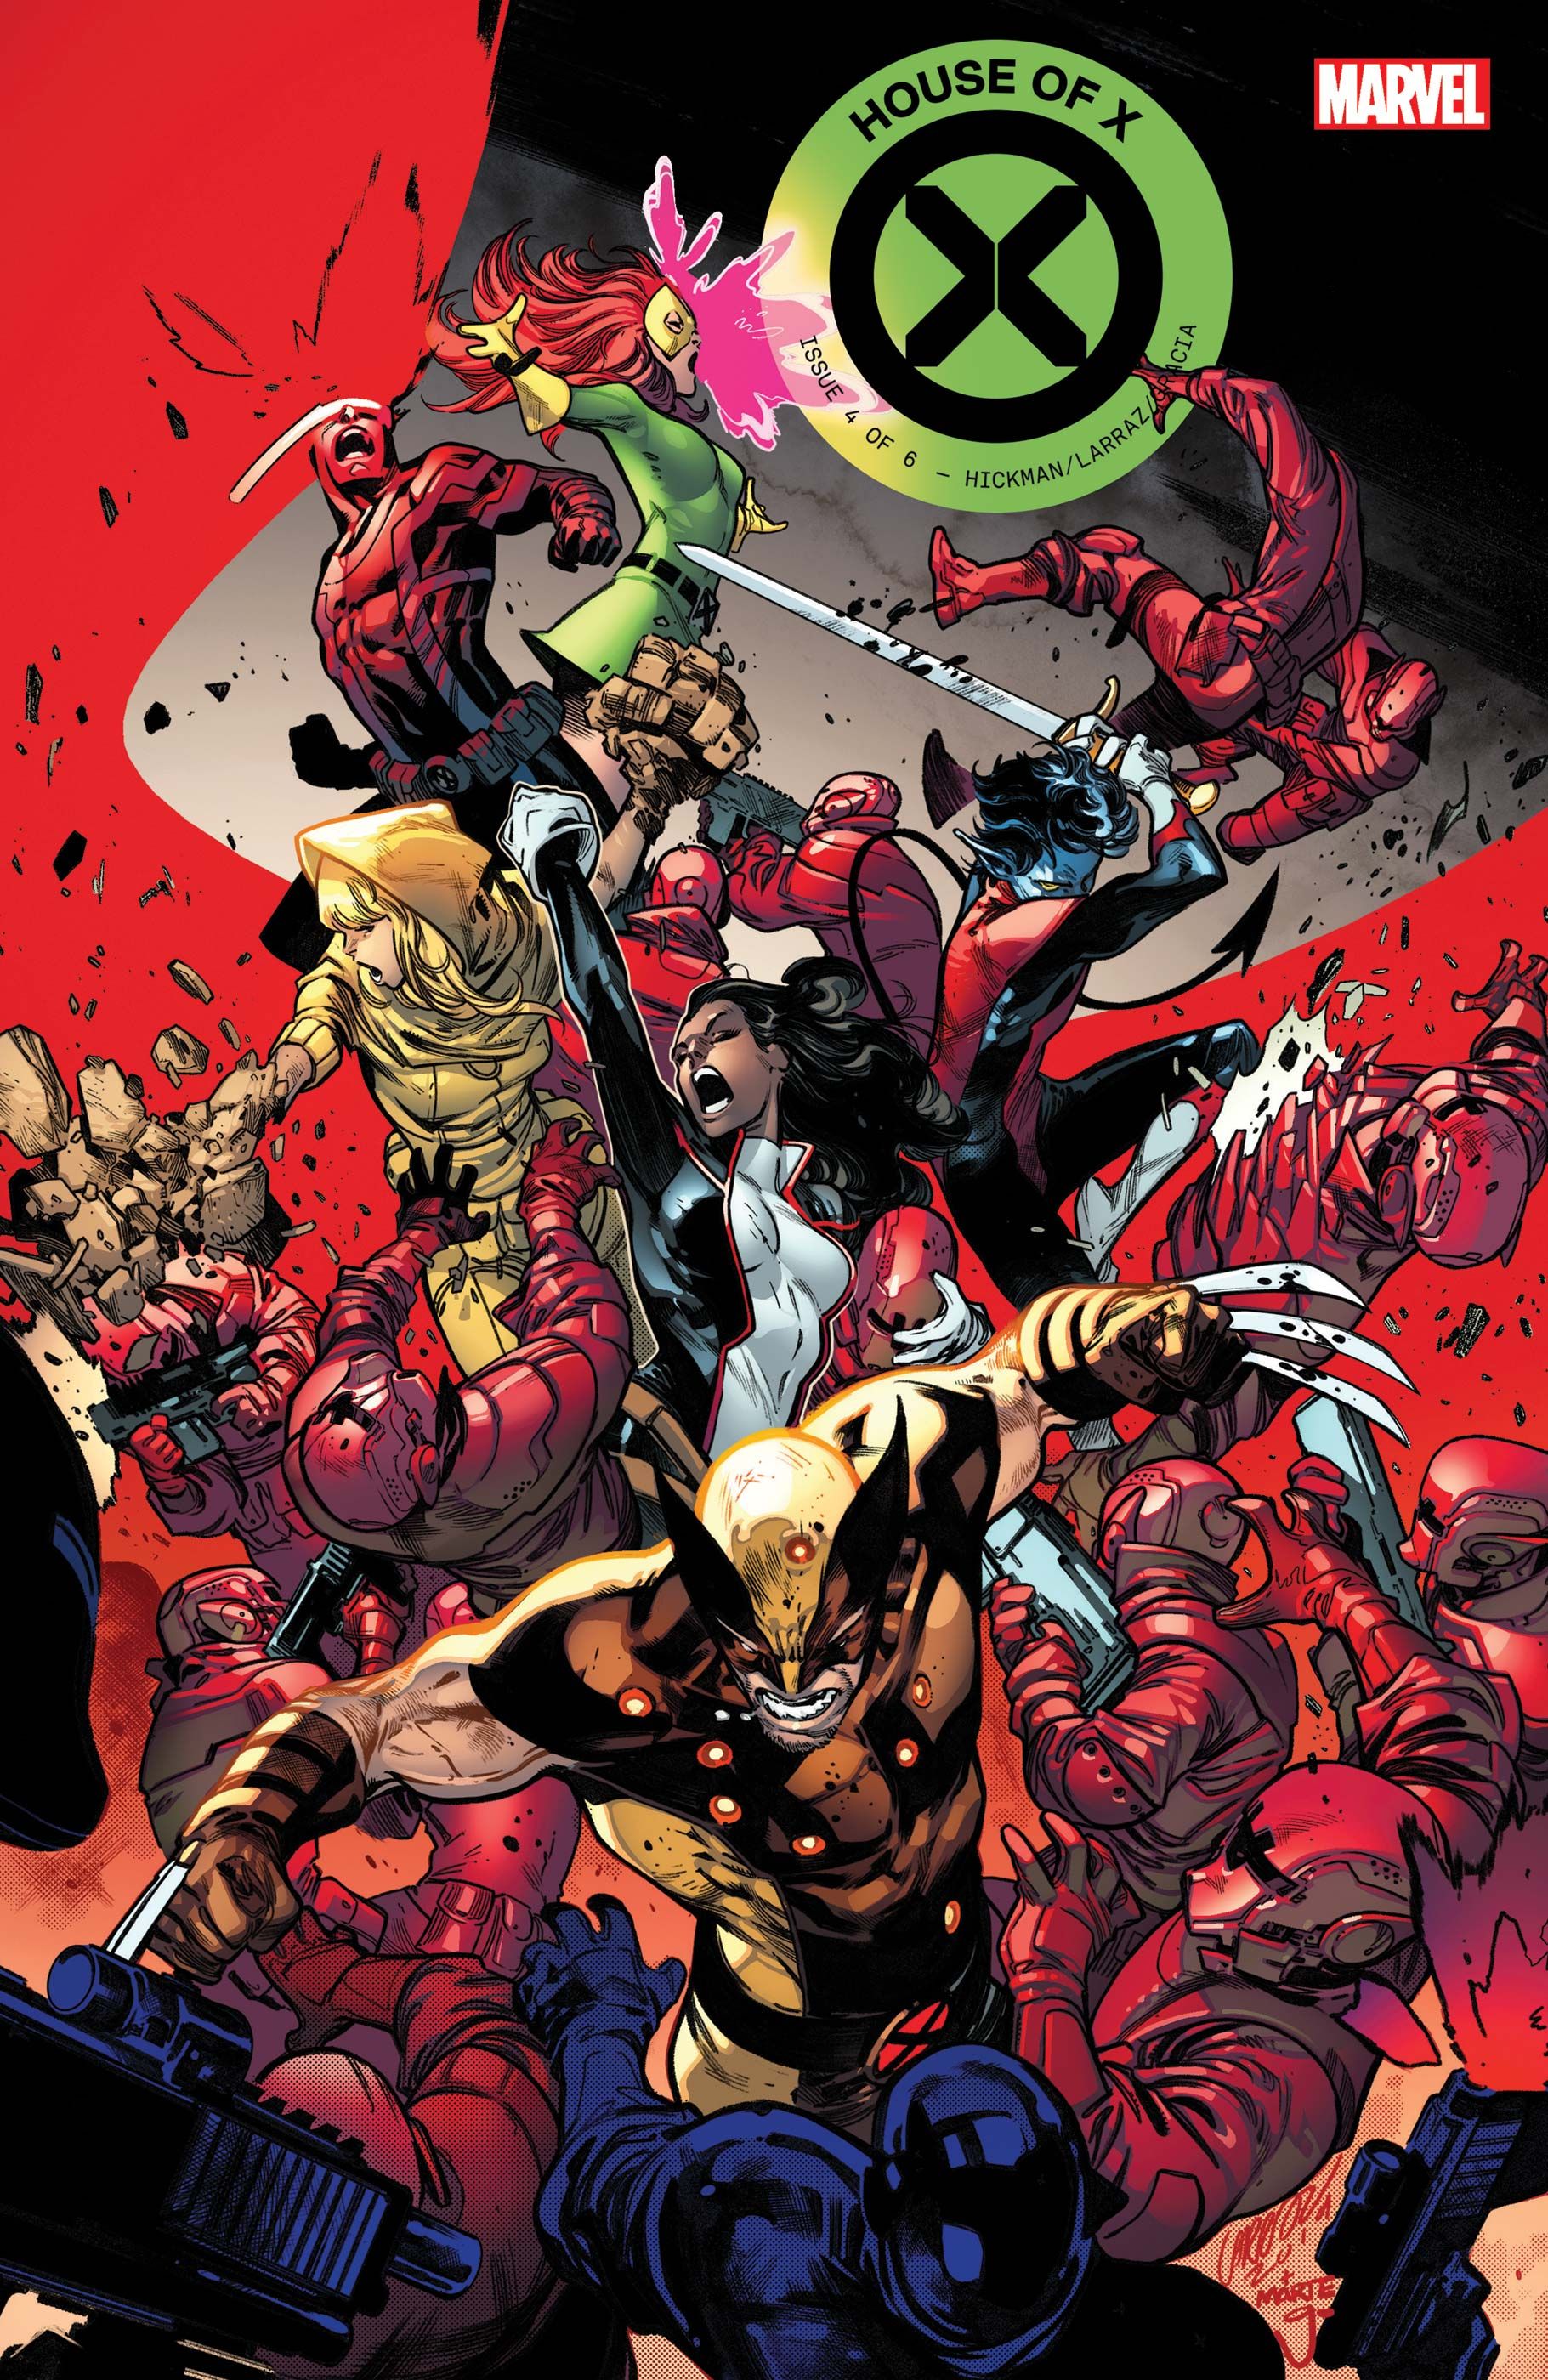 Pepe Larraz and Marte Gracia's cover to House of X #4, featuring X-Men in battle with Orchis